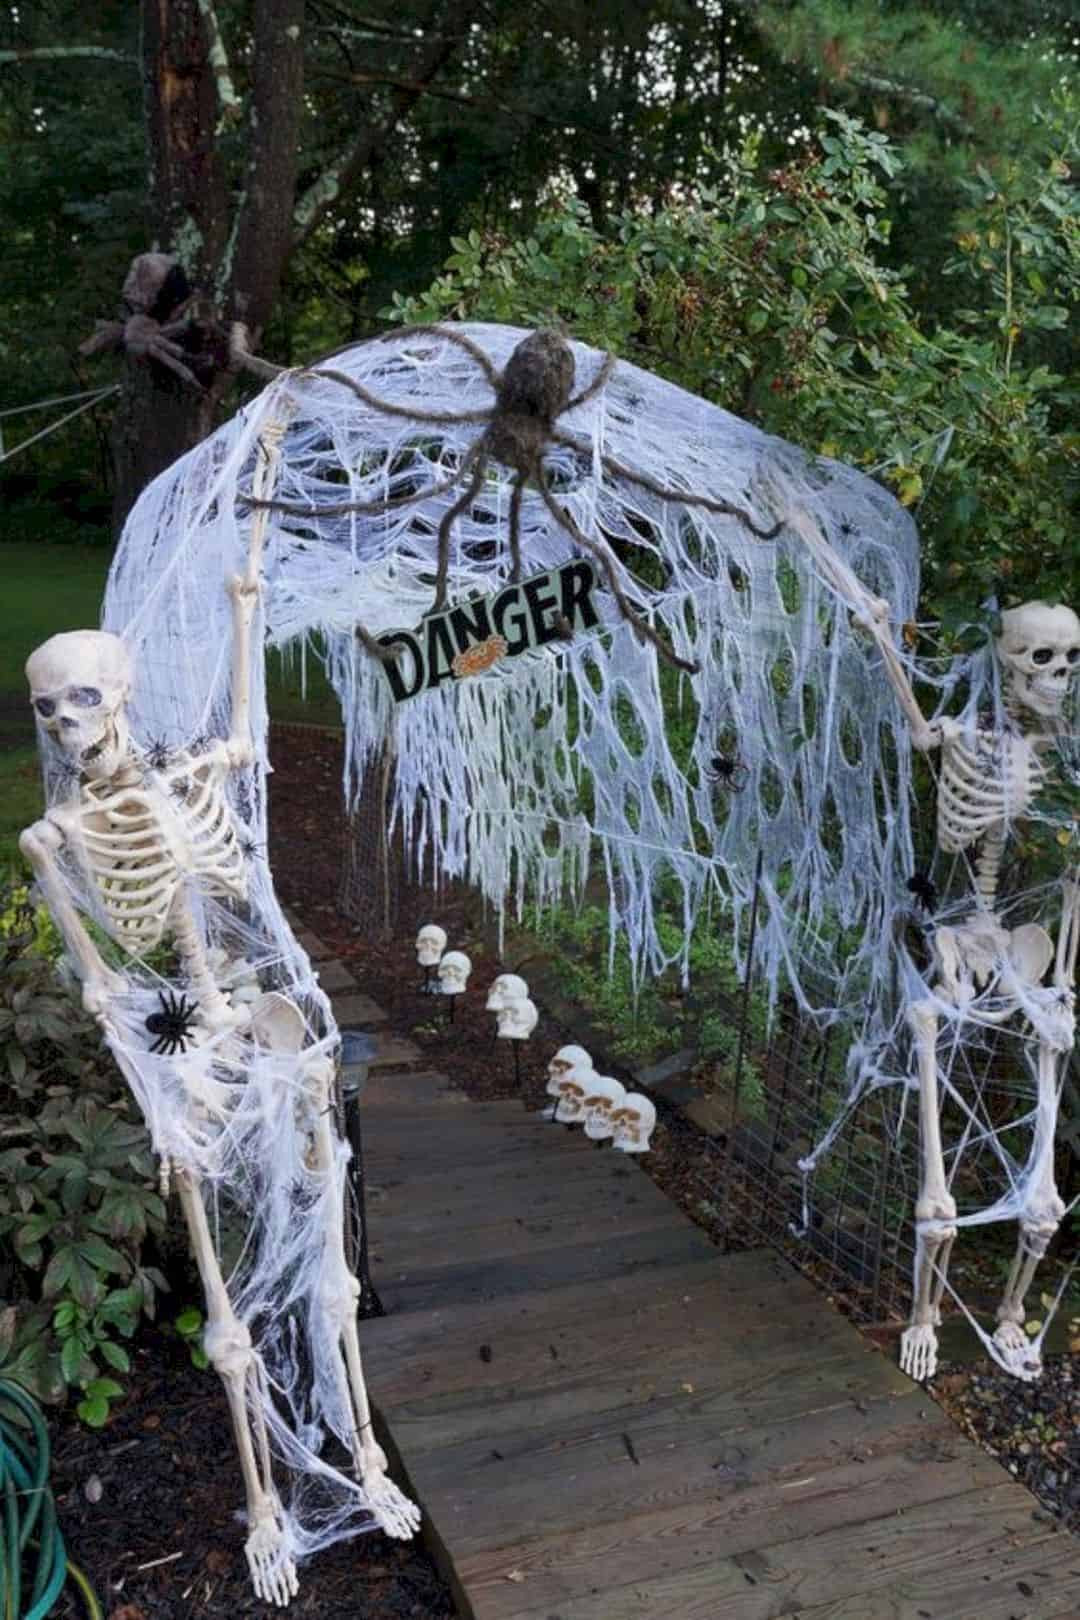 Backyard Halloween Decorations
 Let’s Boo Your Neighbors with These 15 Outdoor Halloween